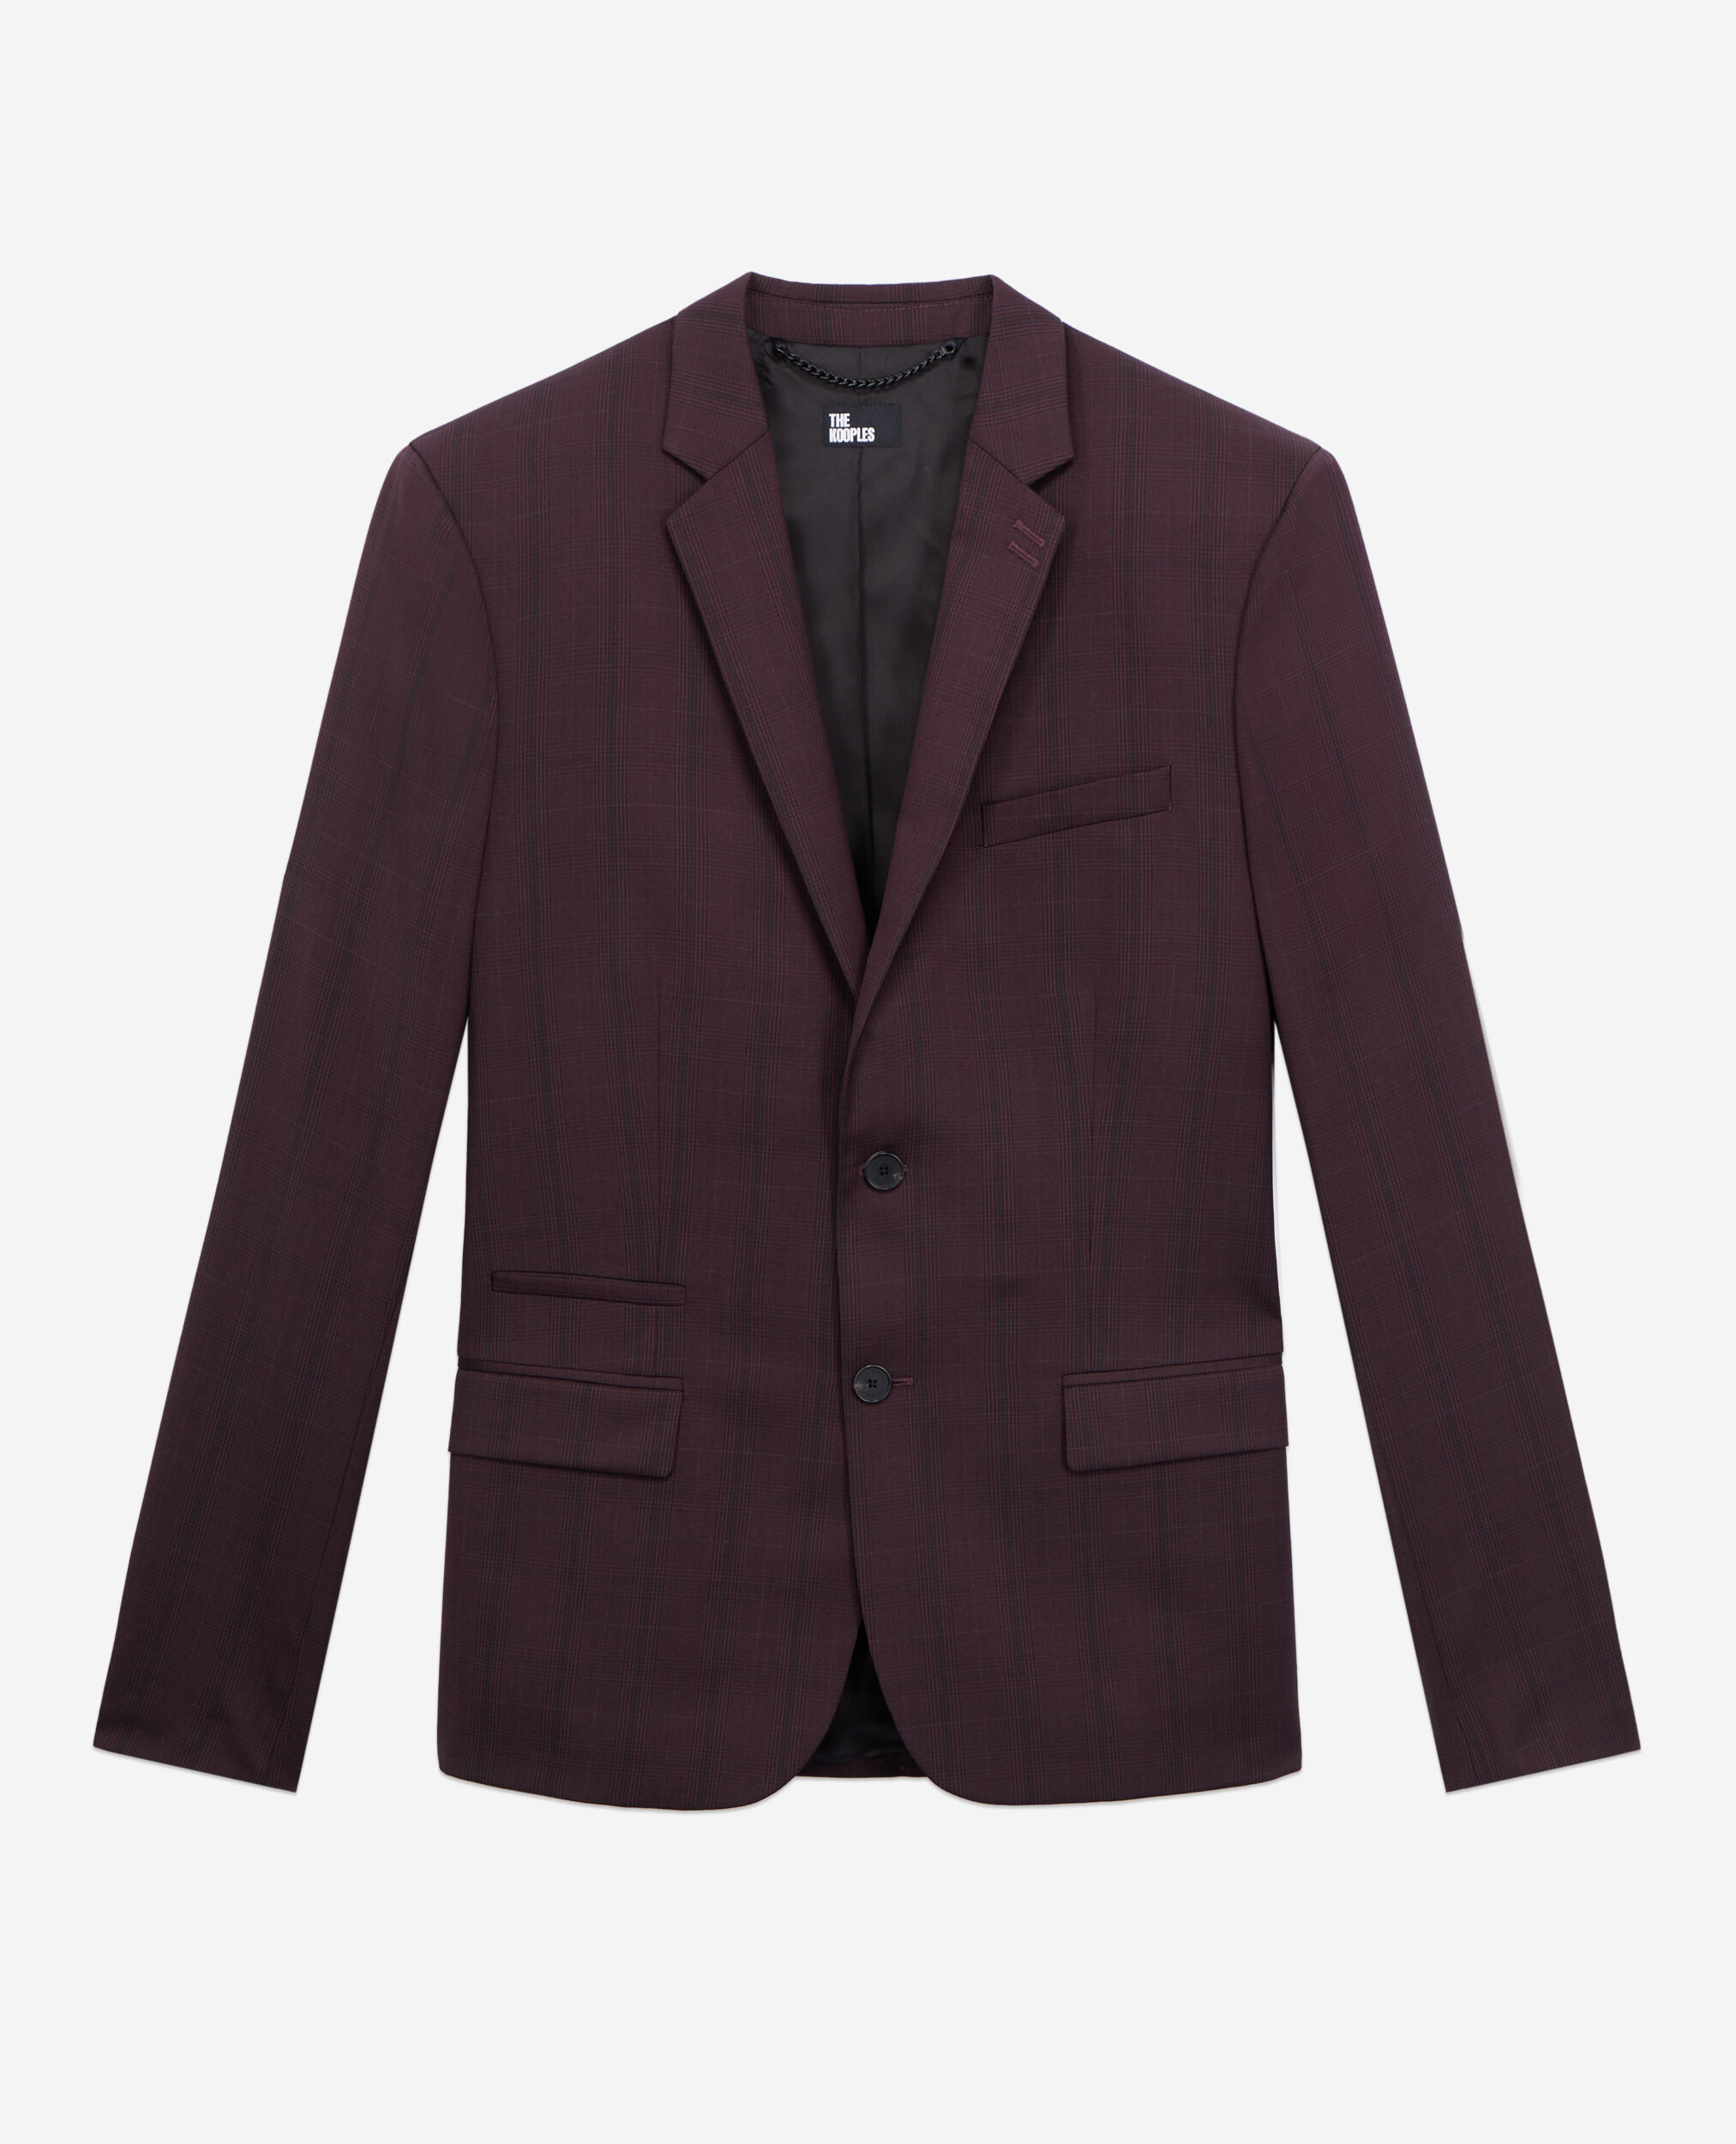 Burgundy checked wool suit jacket, BORDEAUX, hi-res image number null